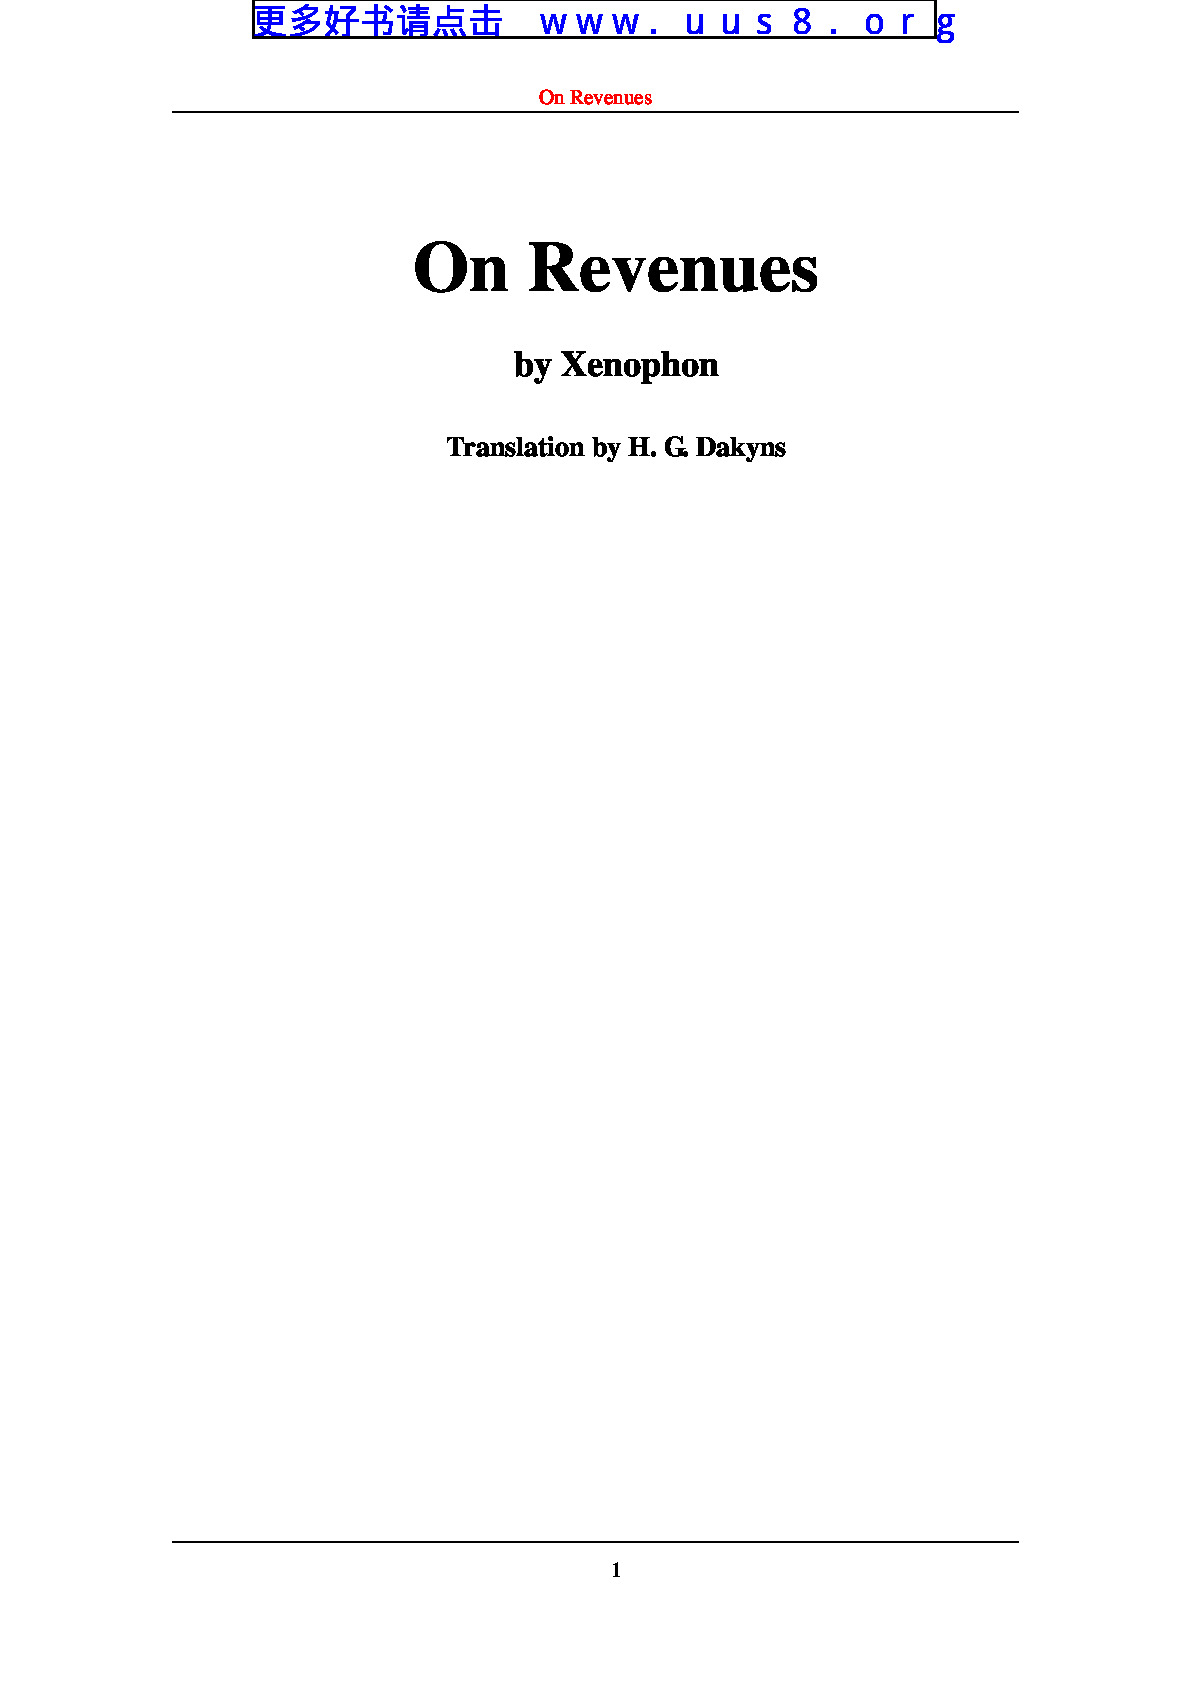 On_Revenues(税收) – 副本